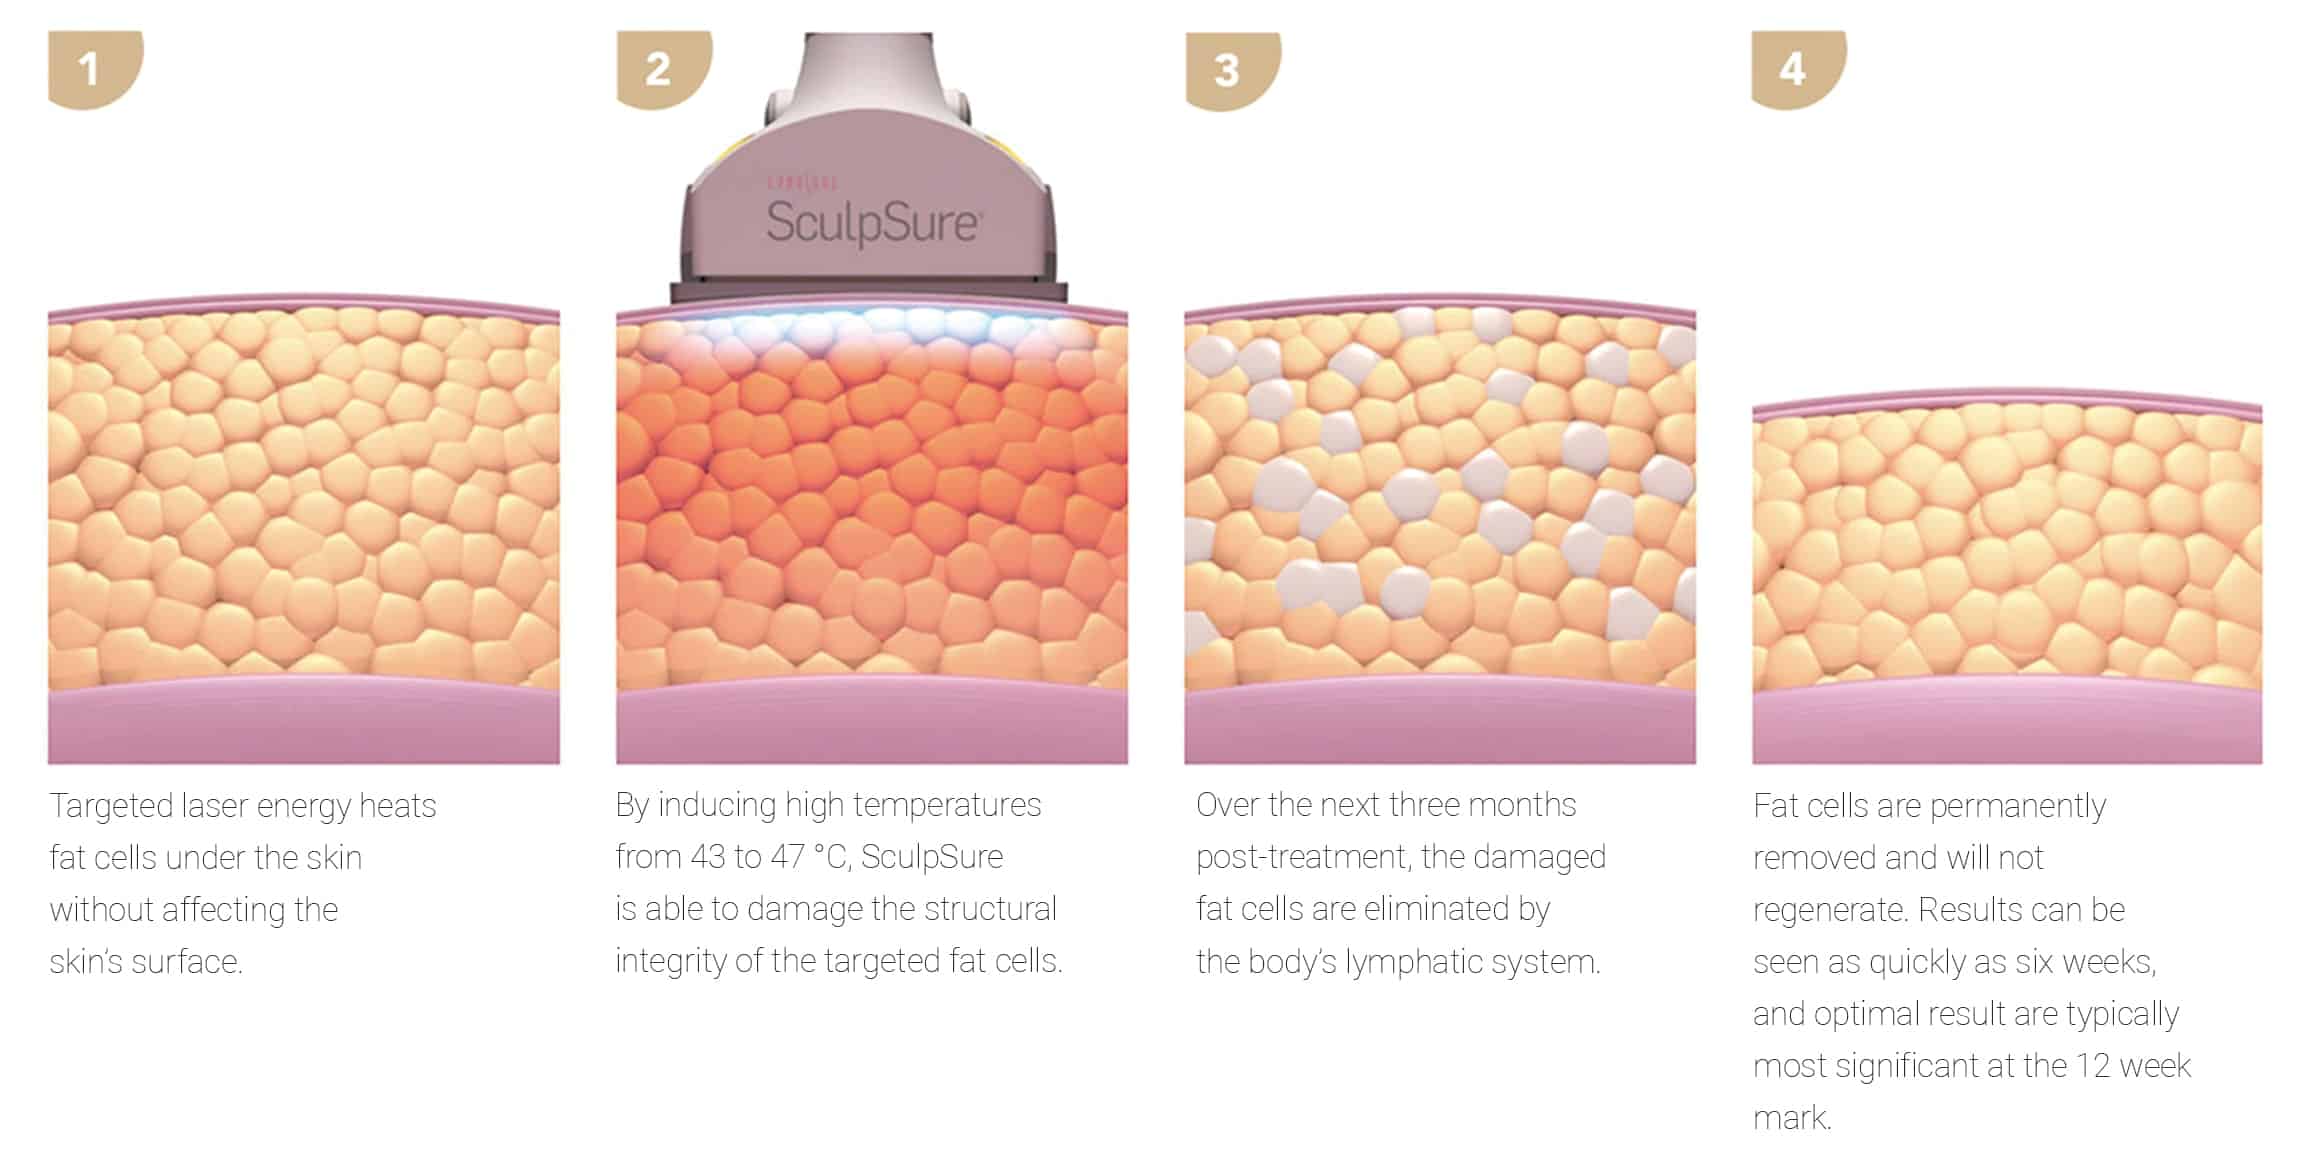 numbered-sculpsure-diagram-english-min